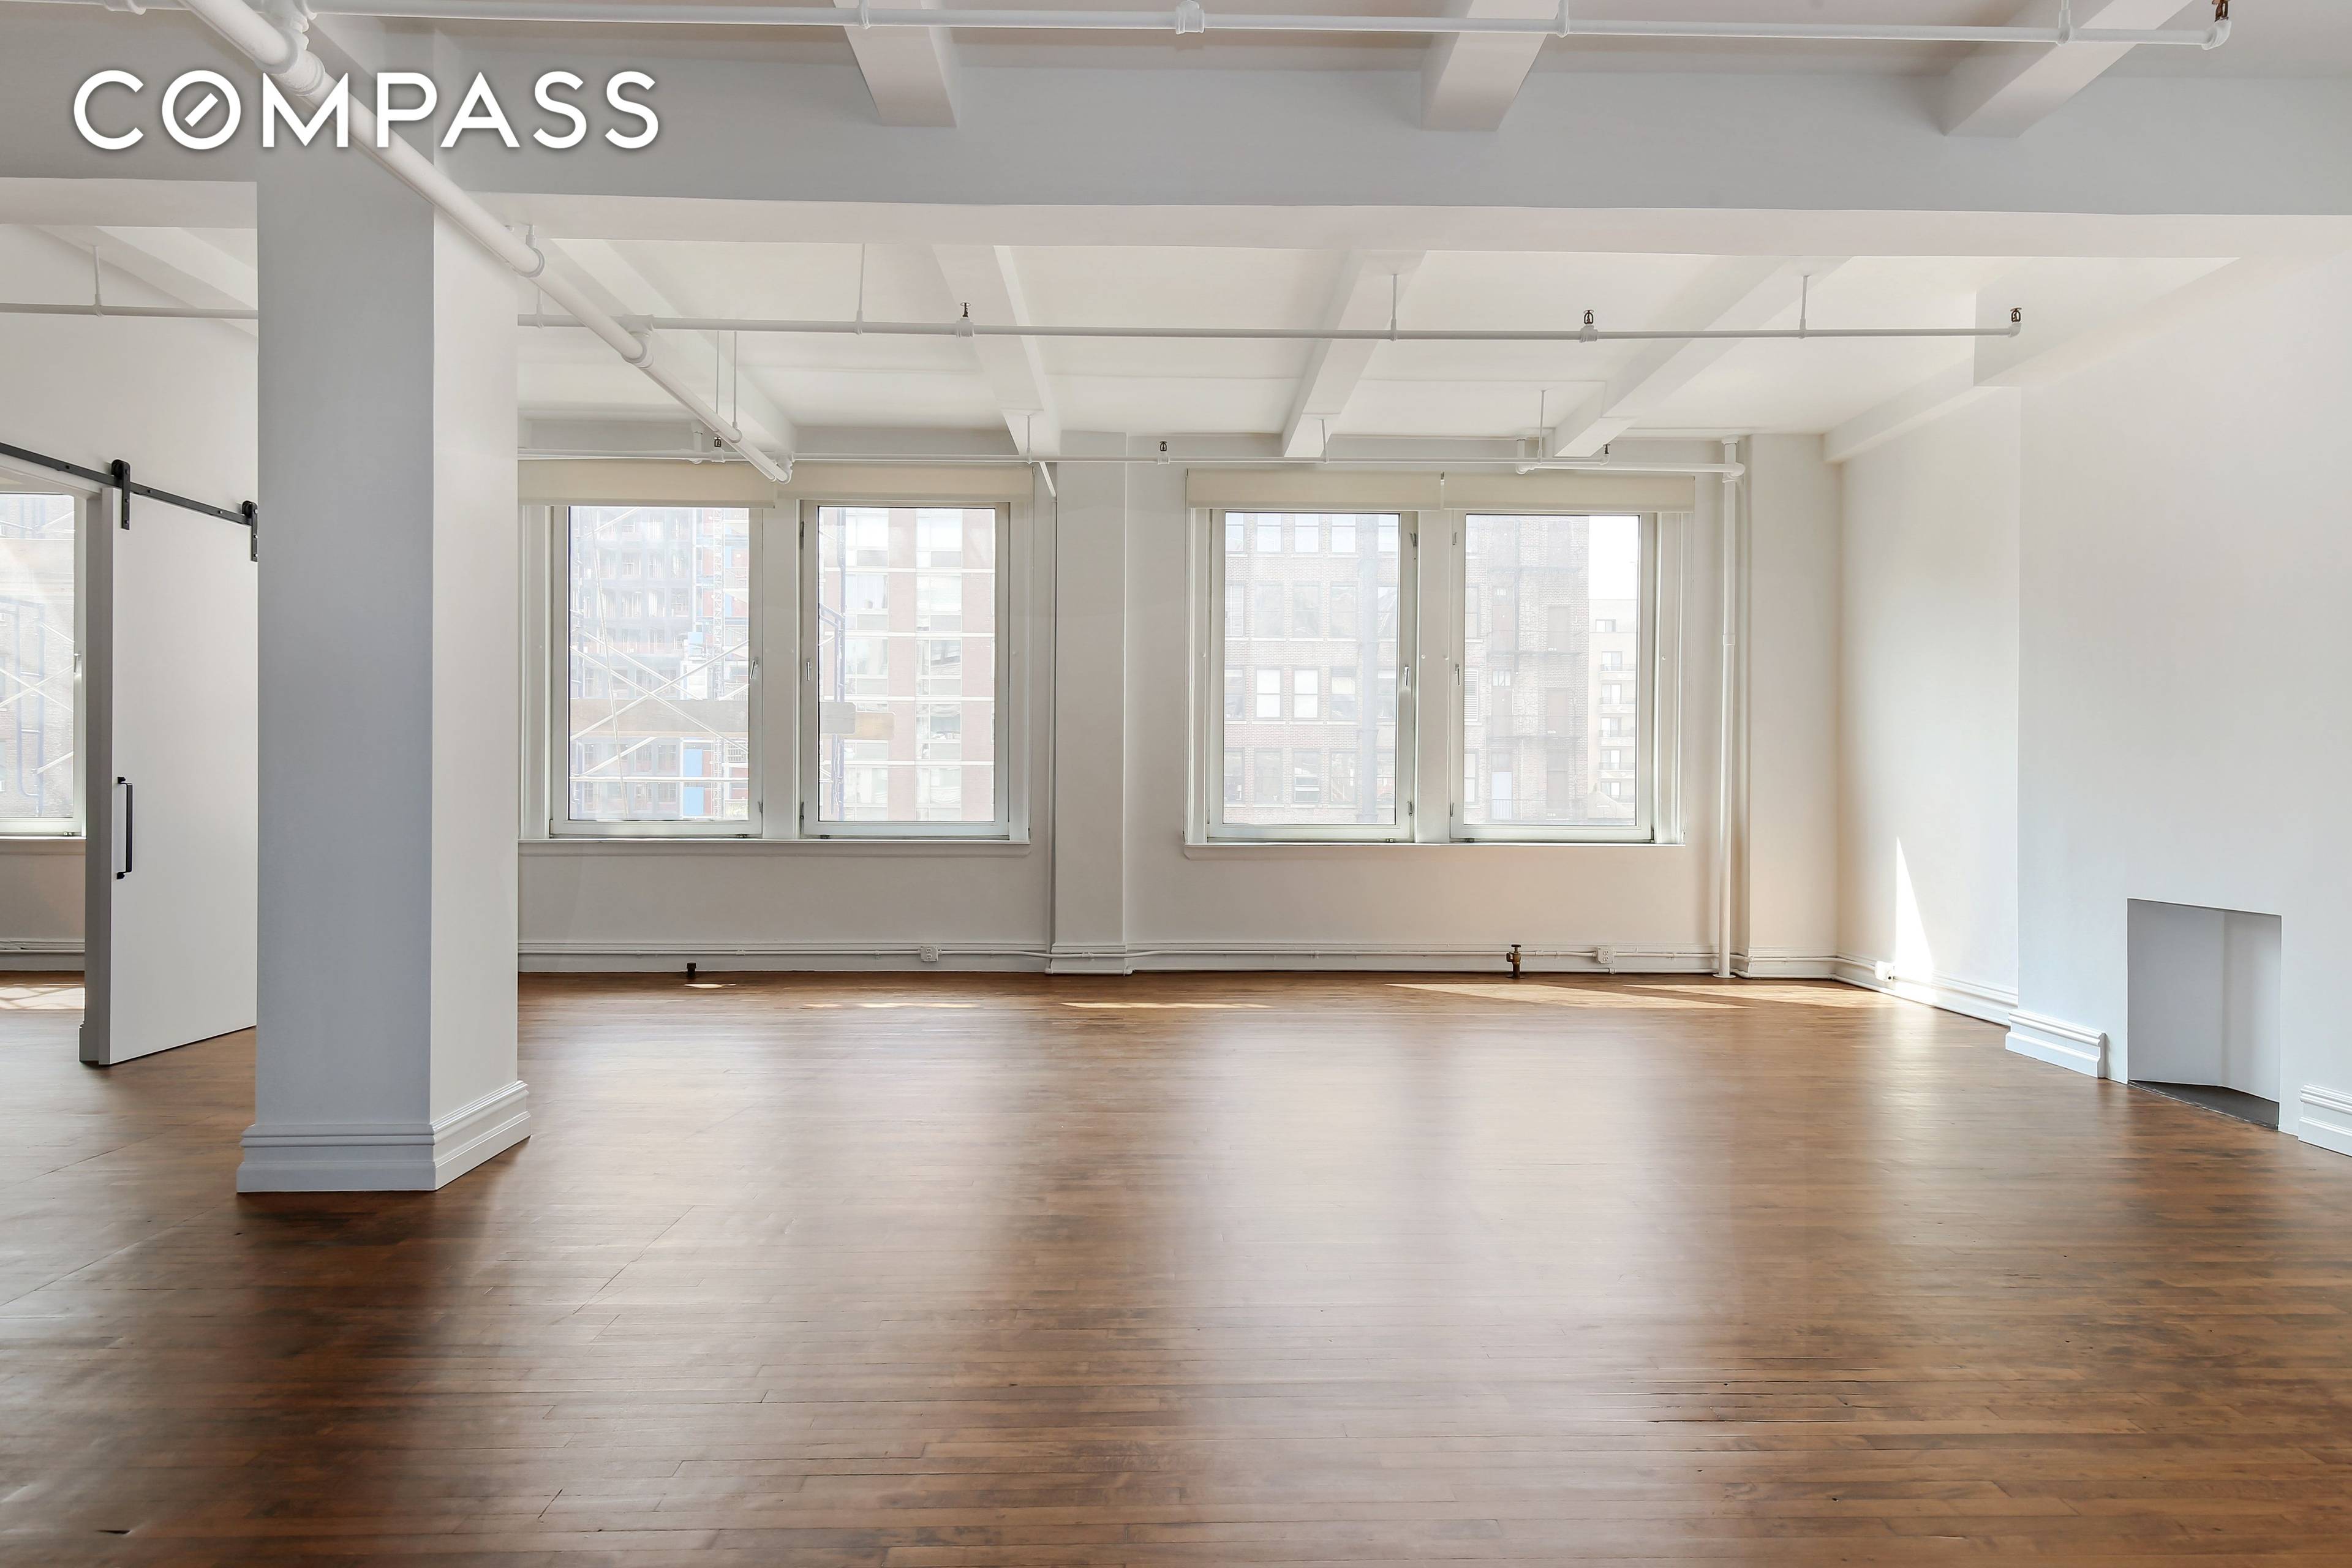 Massive 4100 SF Full Floor Loft with nearly 12 Foot ceilings and fantastic light and city views from 3 exposures.